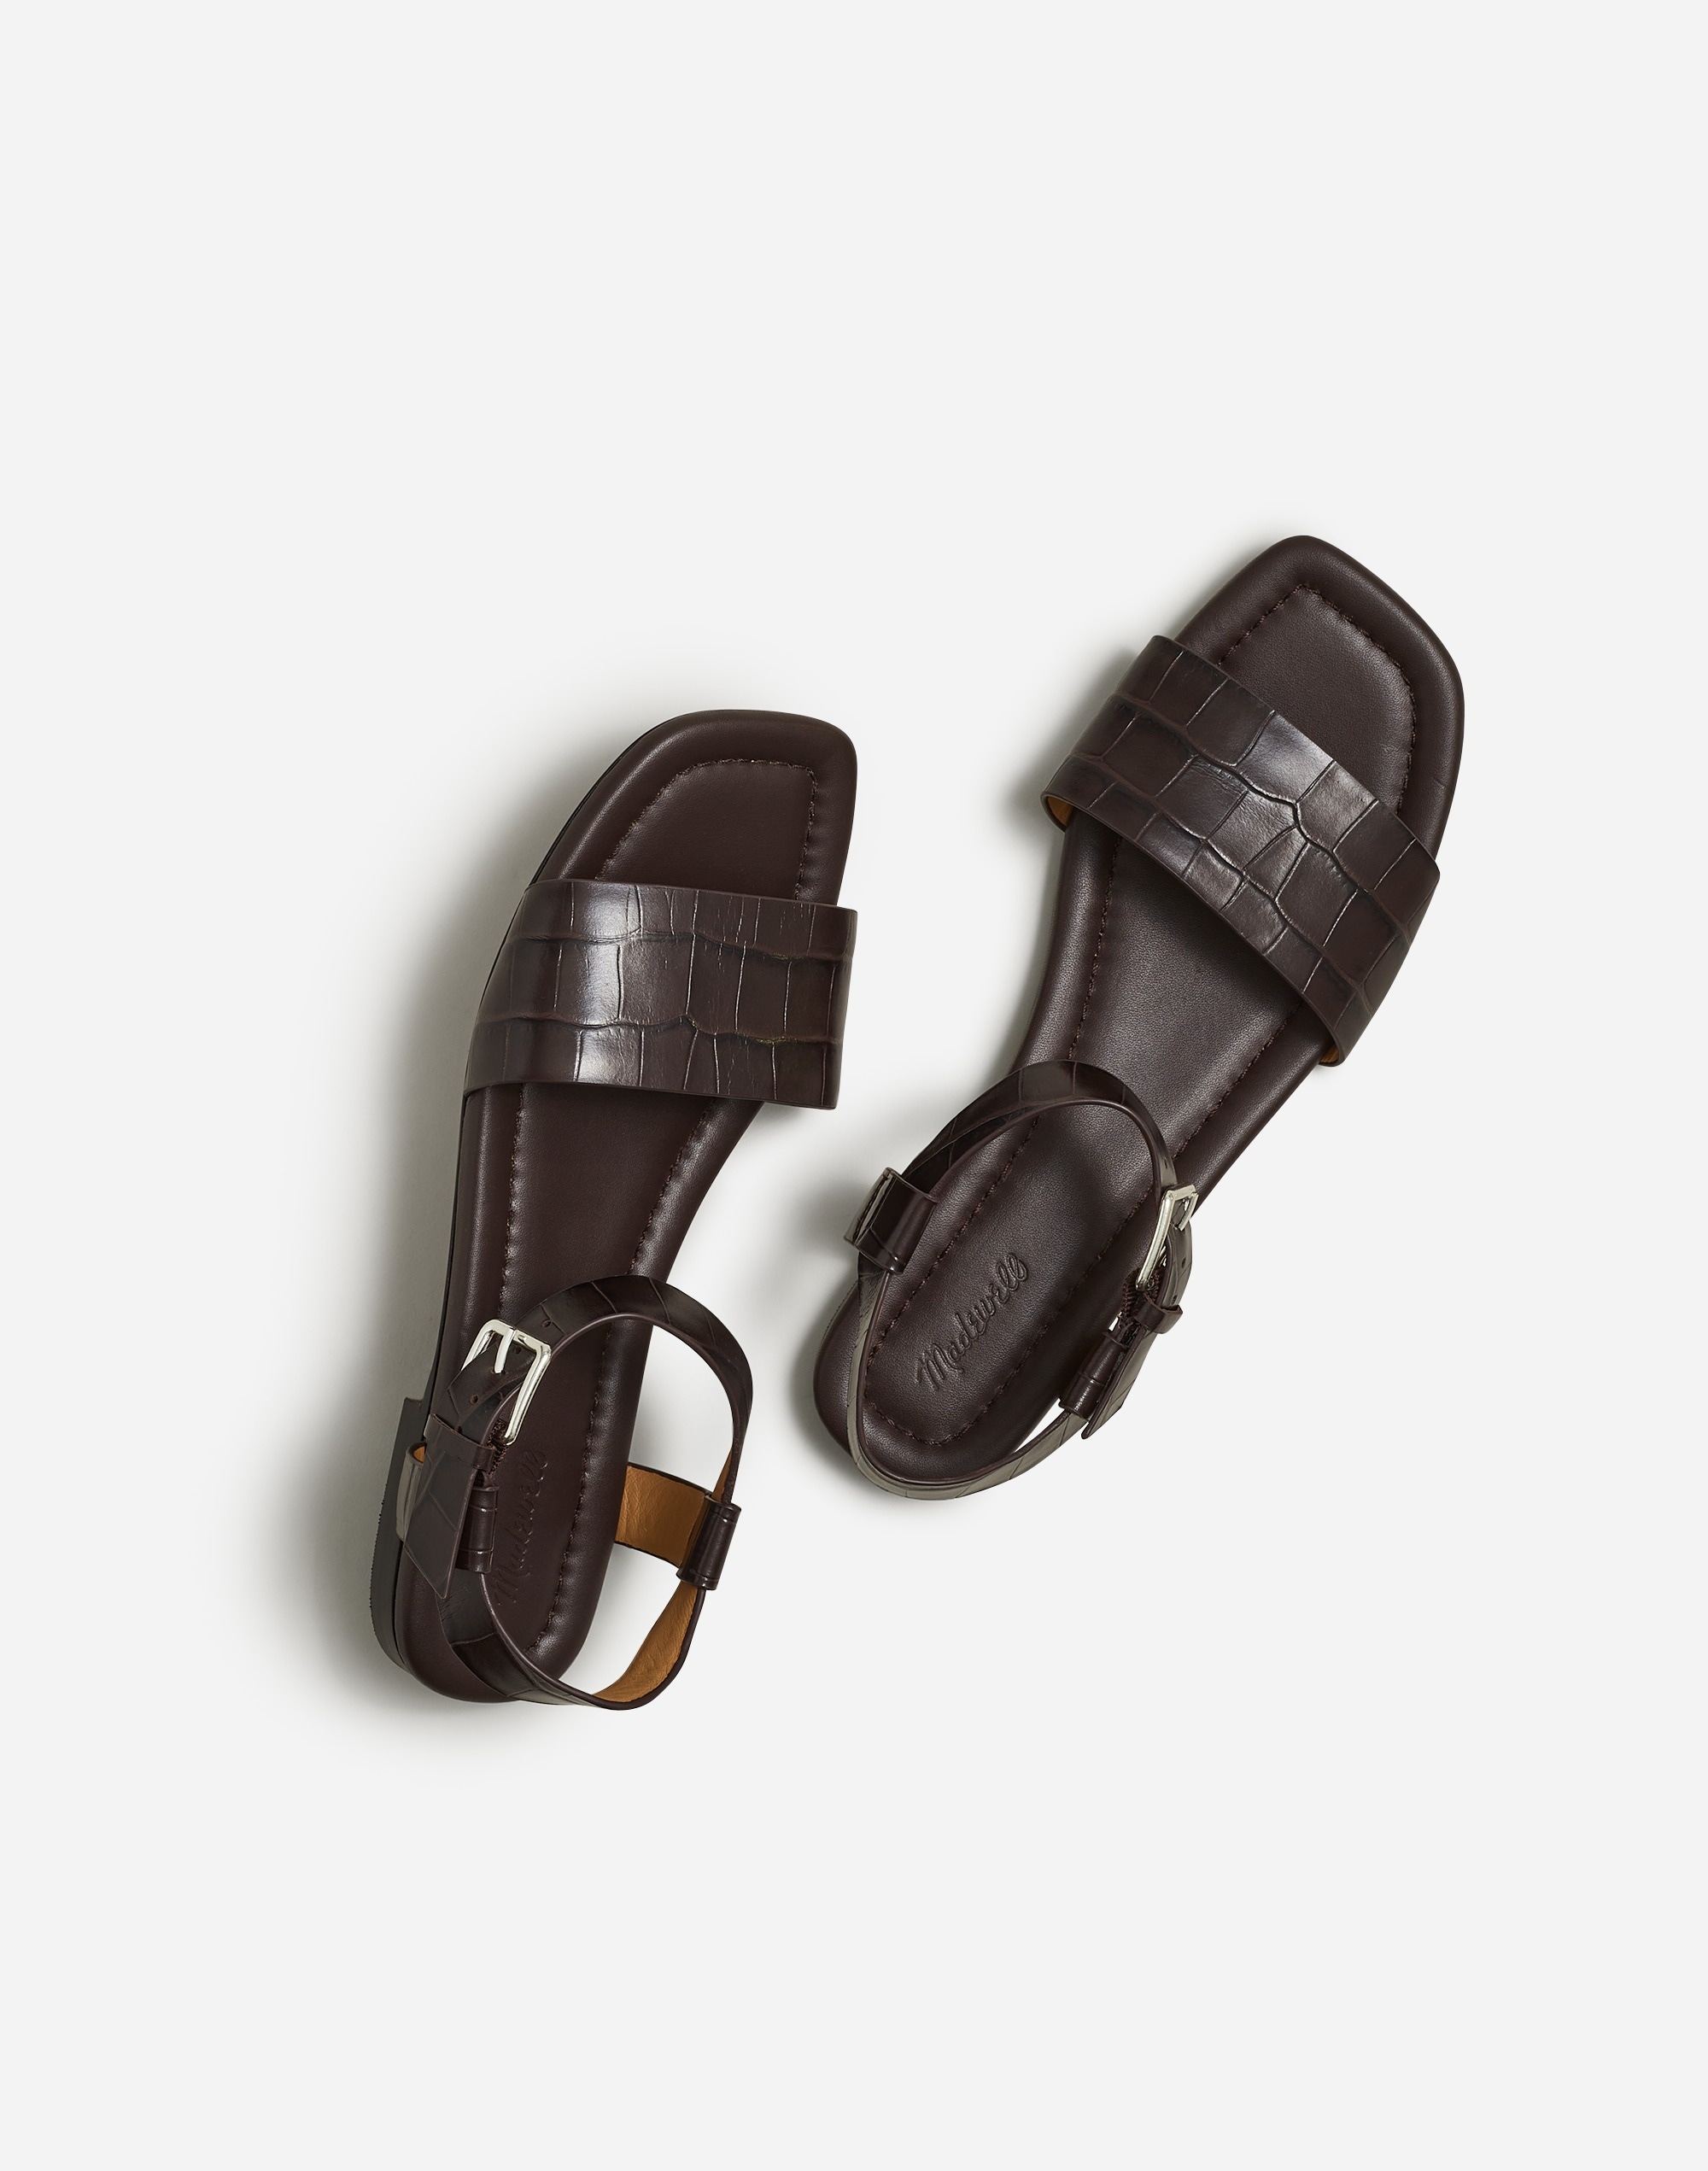 The Karla Ankle-Strap Sandal Croc Stamped Leather